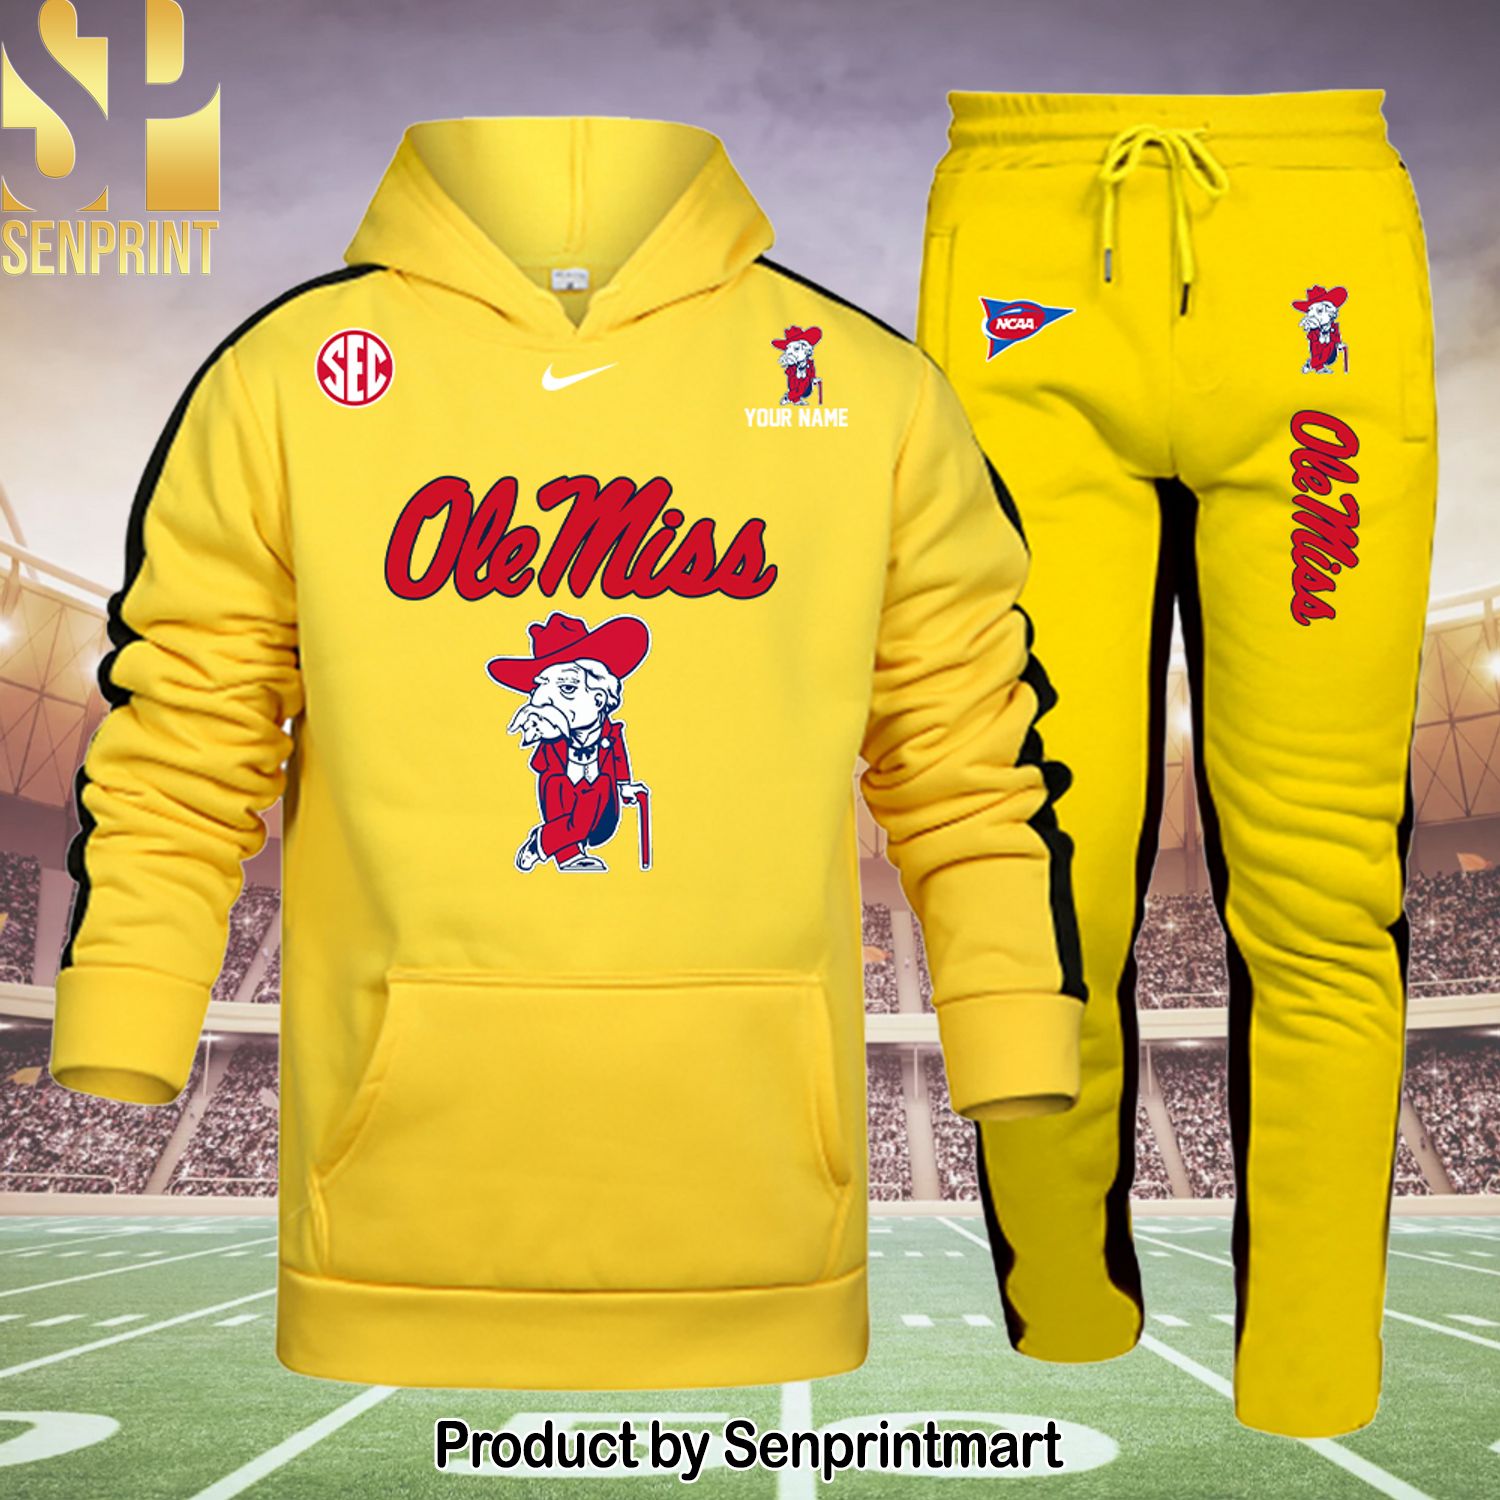 Ole Miss Rebels All Over Print Shirt and Pants